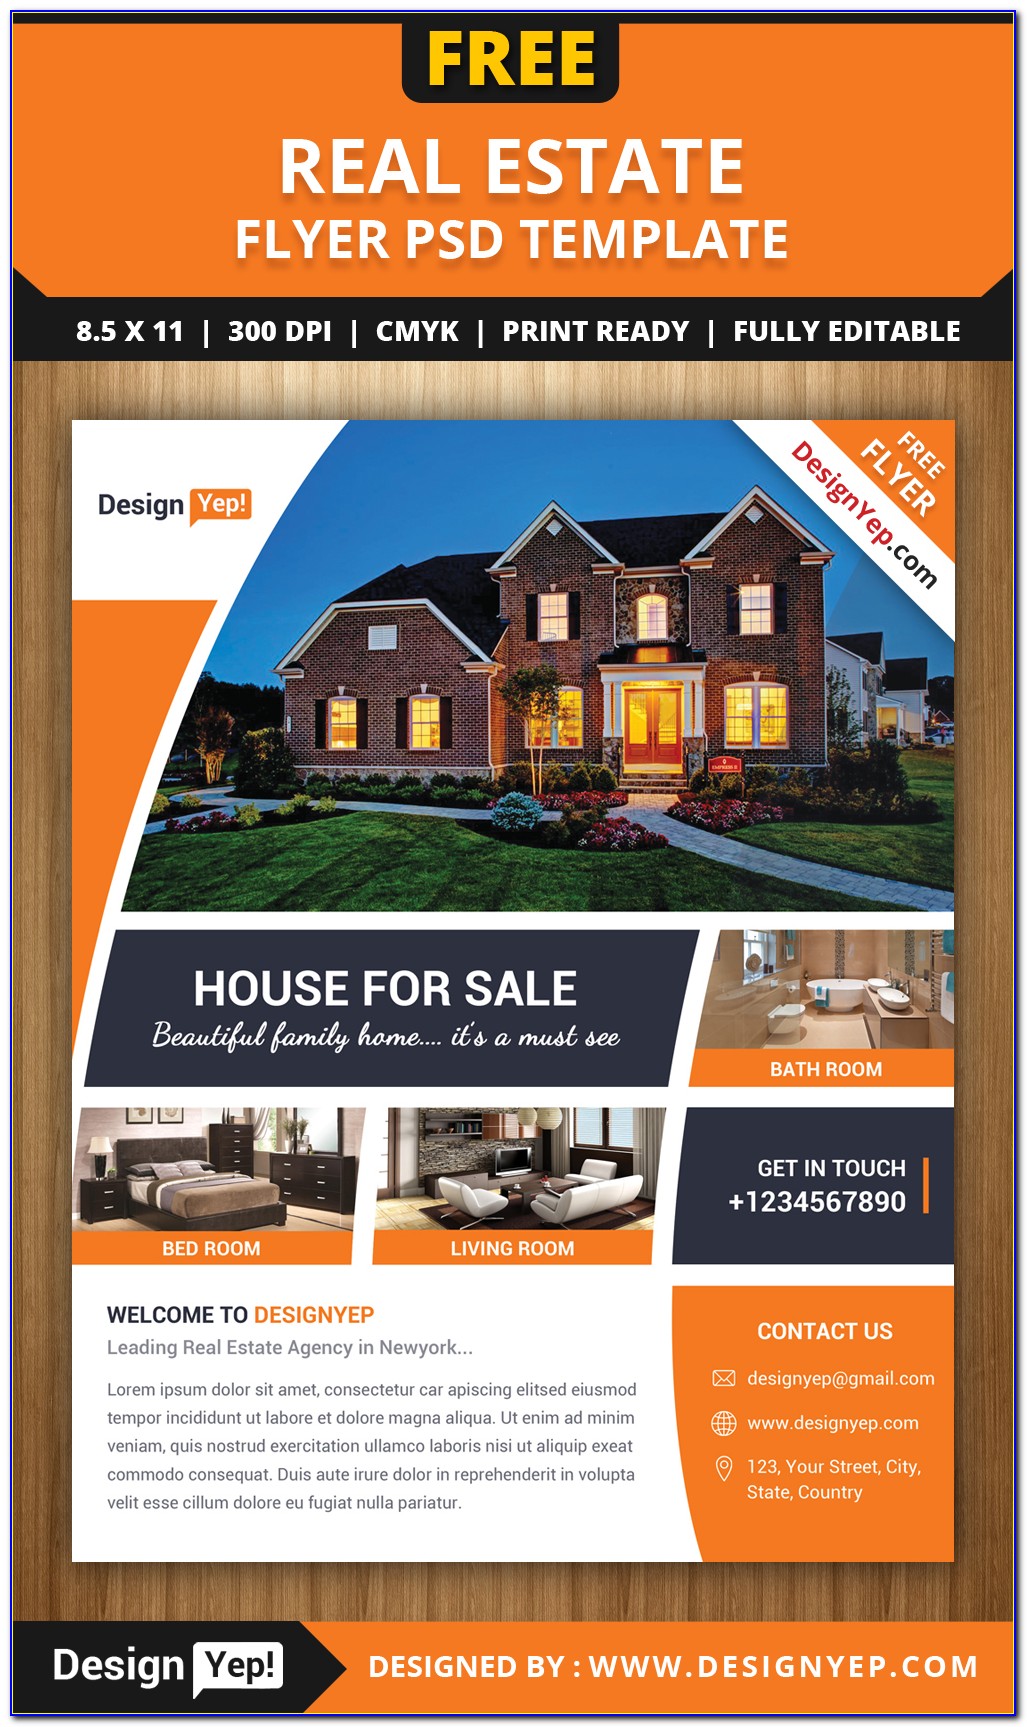 Template For Real Estate Flyer Free